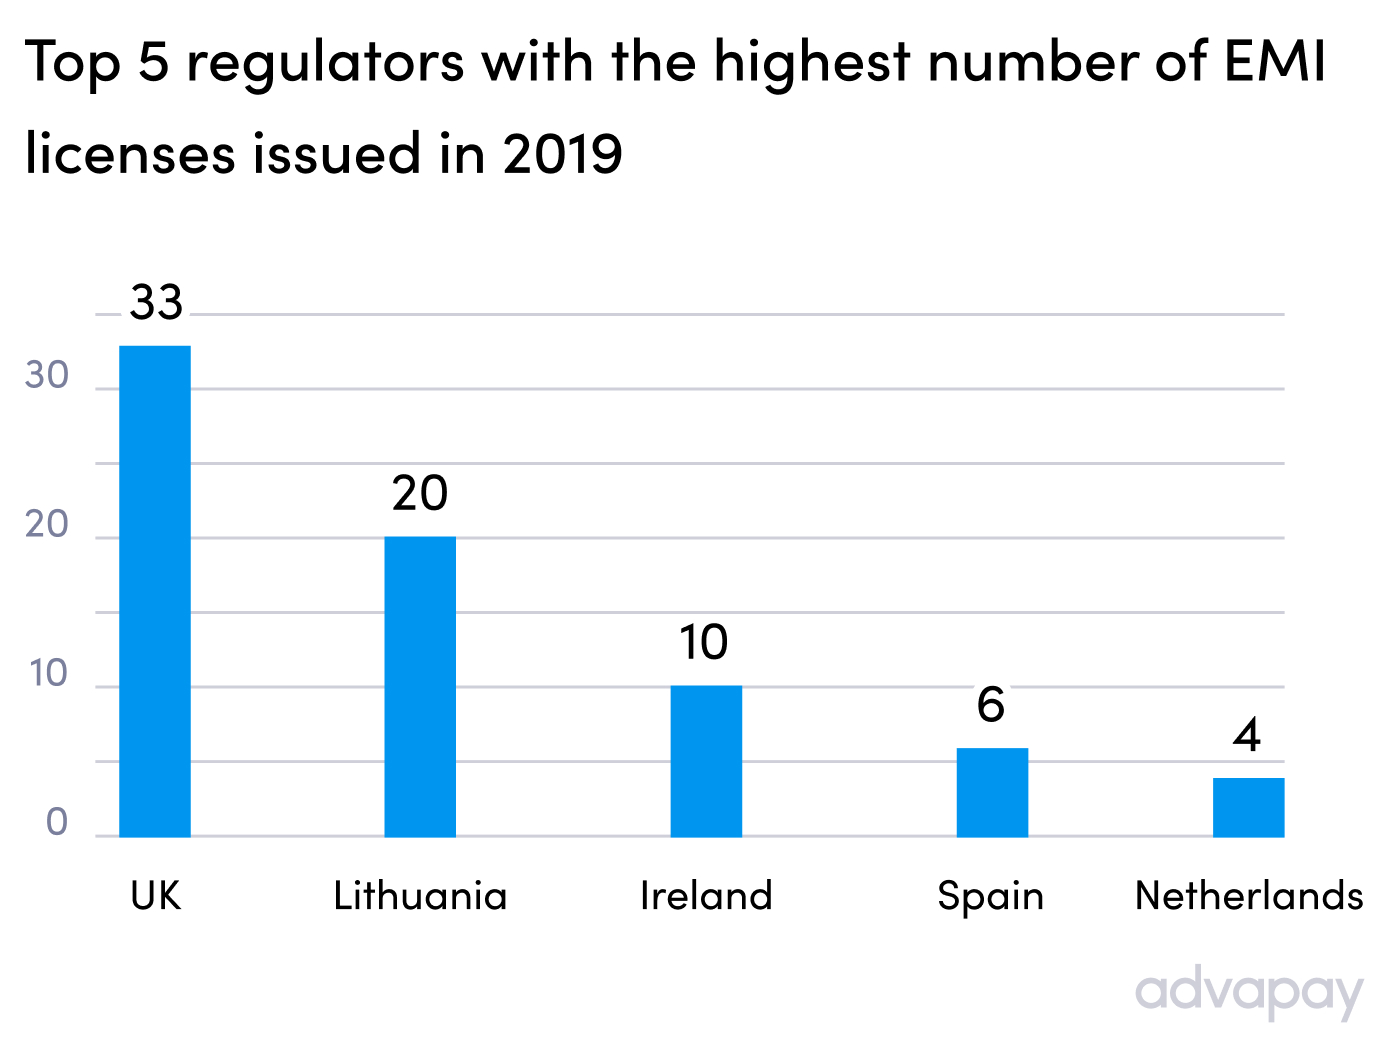 Top 5 regulators with the highest number of EMI licenses issued in 2019